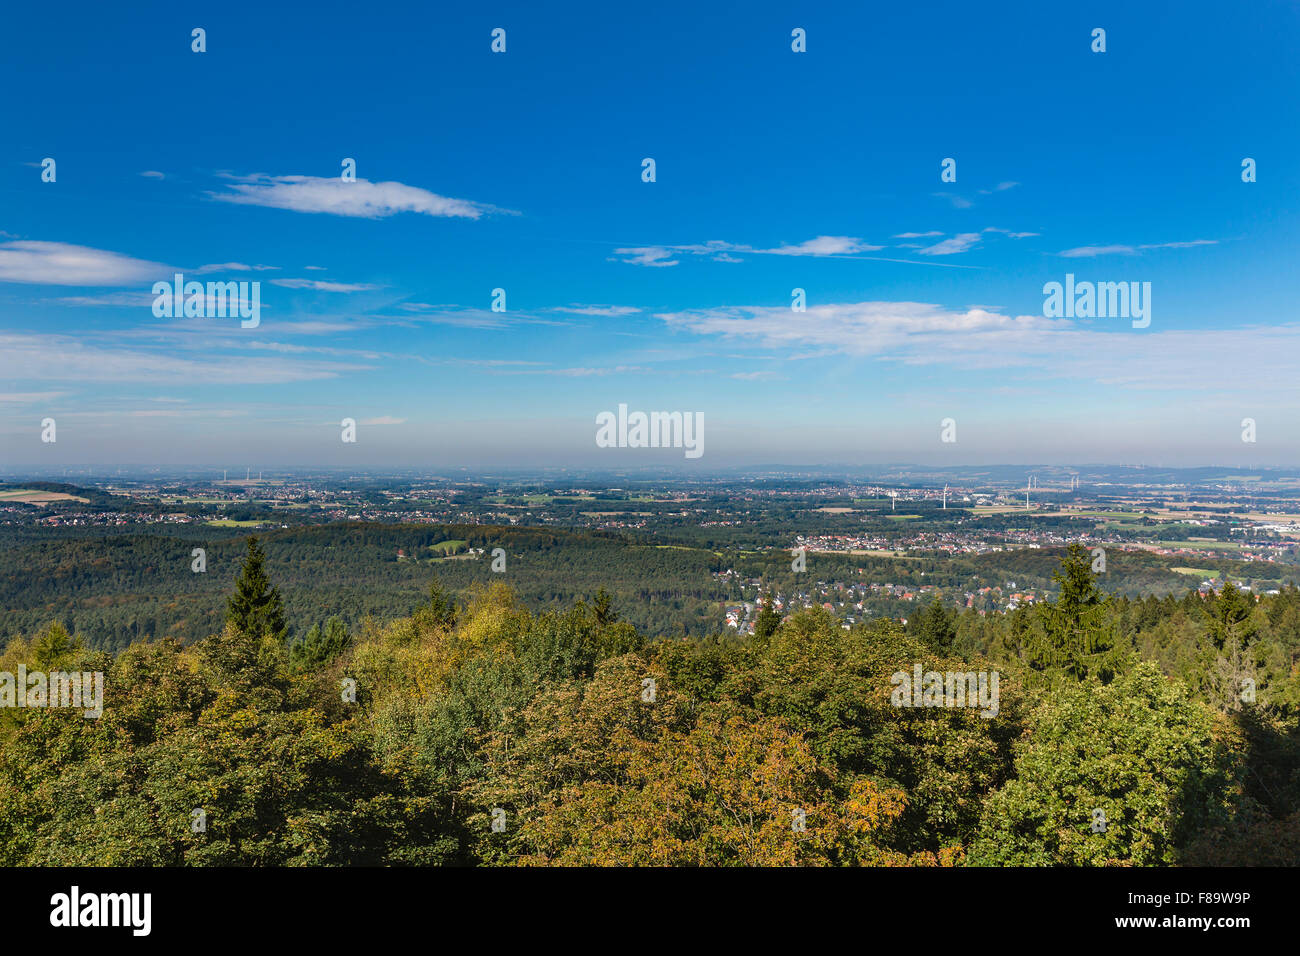 View from the Hermannsdenkmal observation point in the Teutoburger Wald to the north, Germany Stock Photo